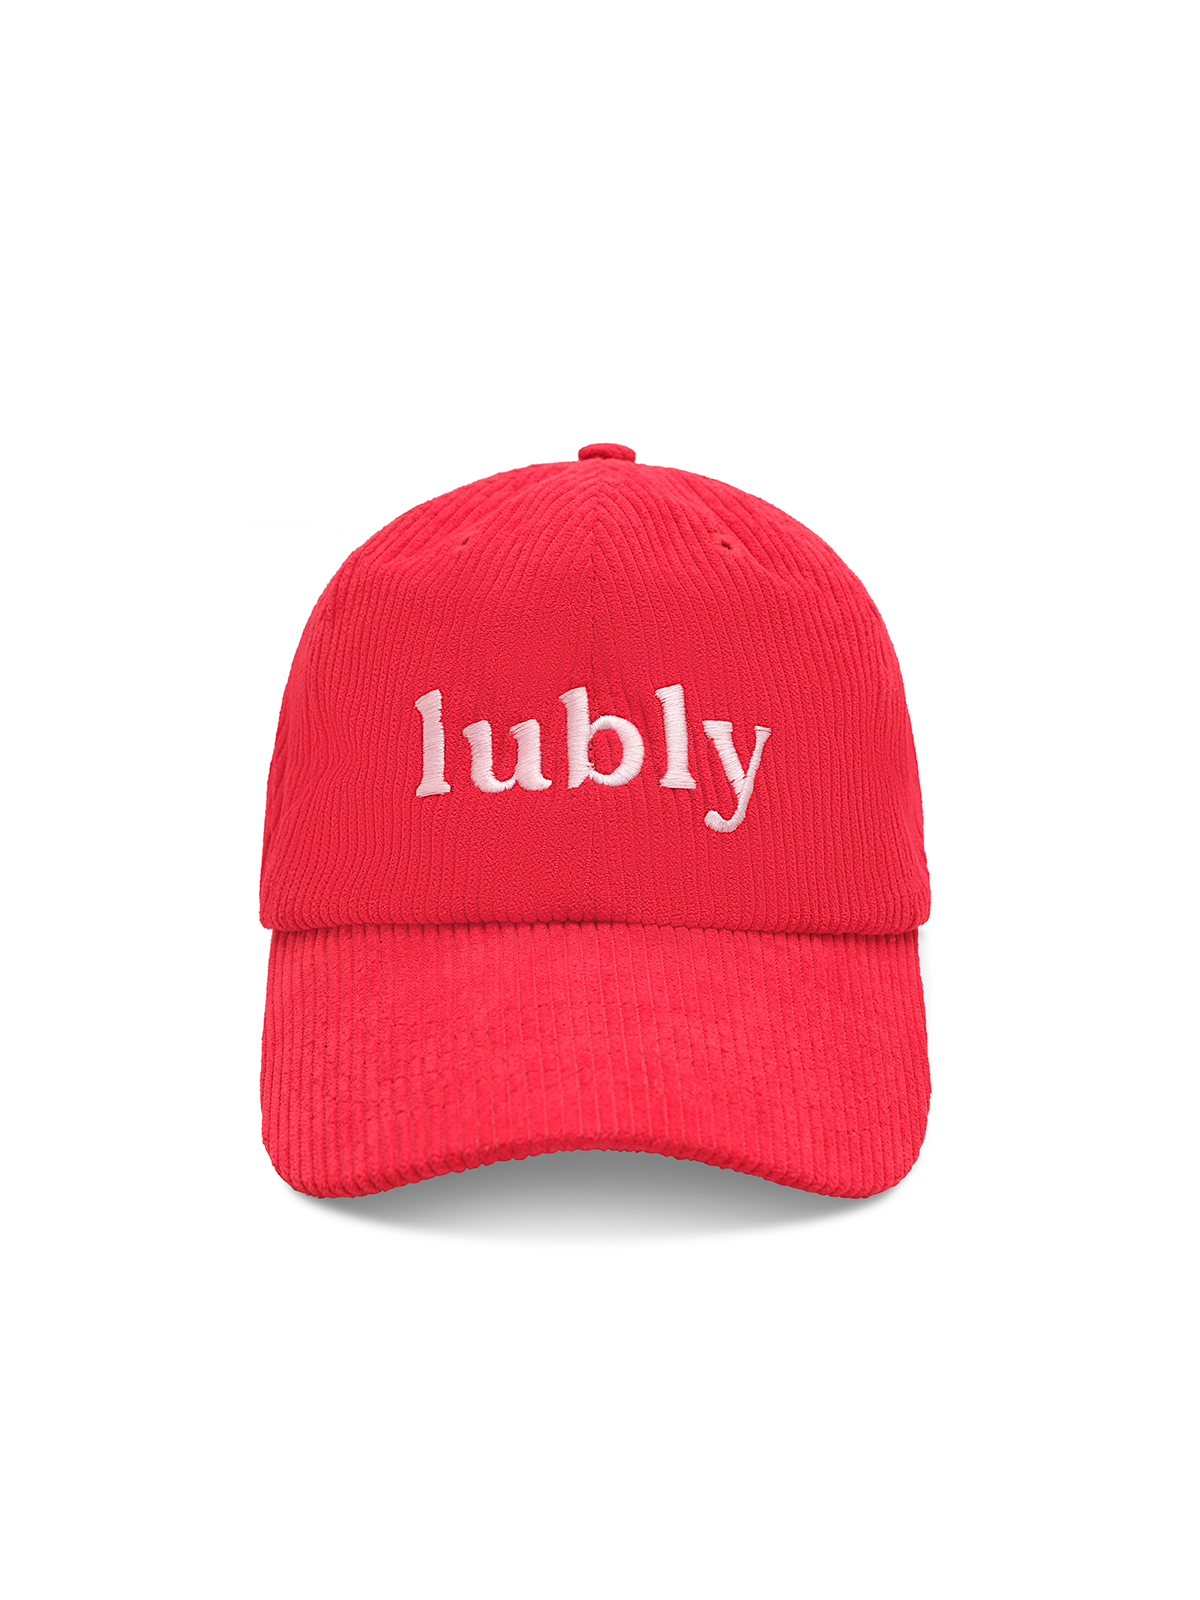 Lubly cord cap